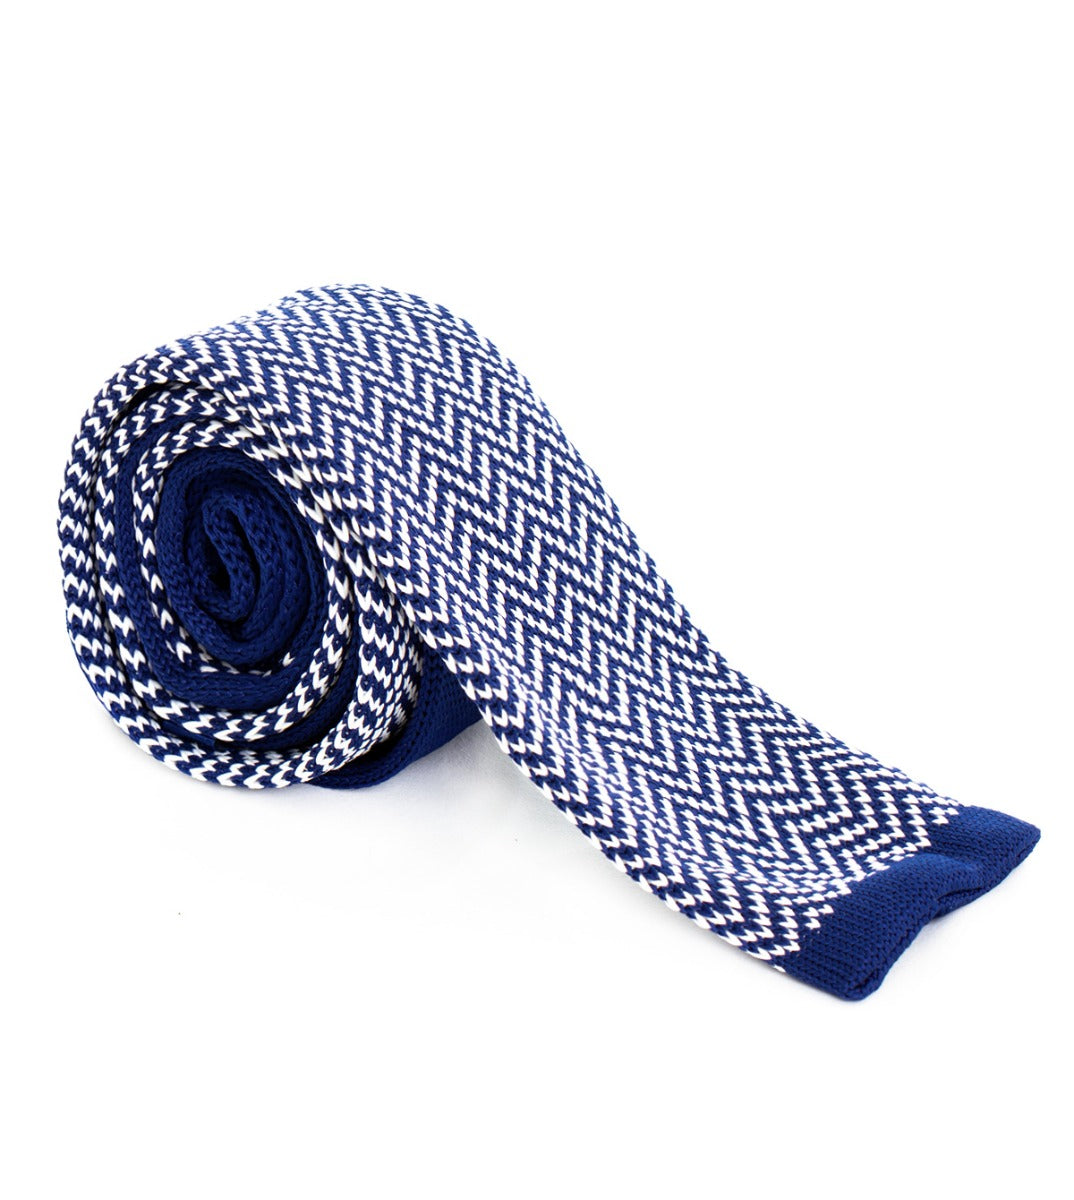 Unisex Men's Knitted Tie Blue White Knitted Tie Zig Zag Pattern GIOSAL-CP1088A